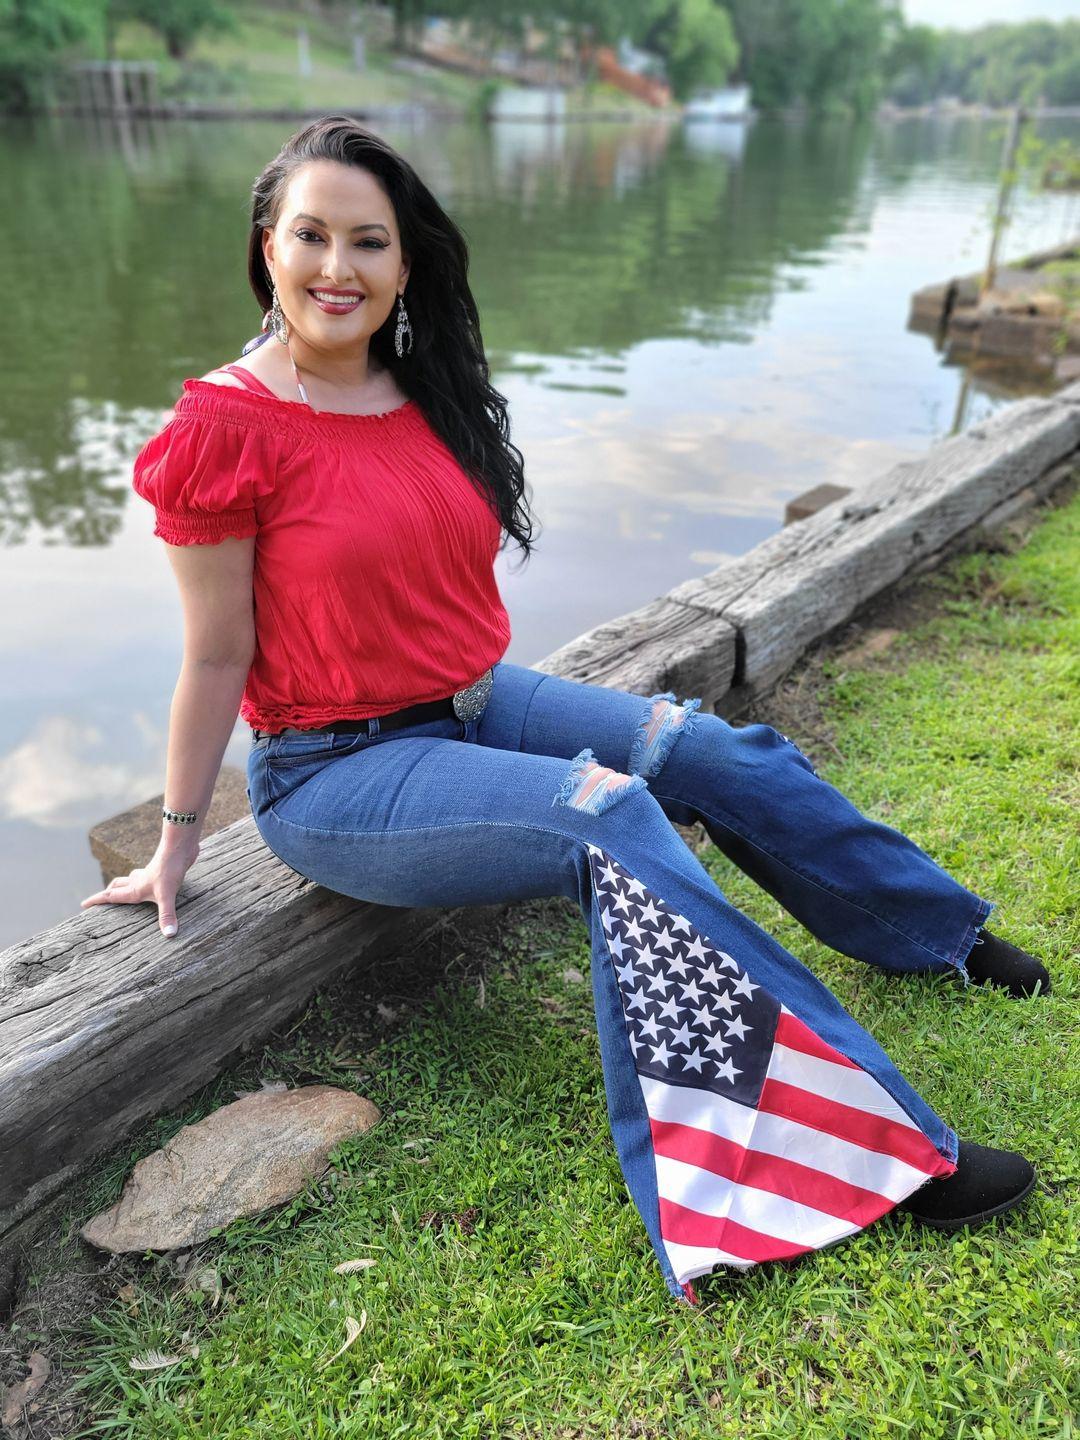 Made in America Distressed Stars & Stripes Flare Jeans  33-34" inseam - american, americanflag, bell, bells, bottom, botttoms, cowgirl, distressed, flag, flared, flaredjeans, flares, jeans, nfr, patriot, patriotic, PATRIOTICFASHION, patriotism, ripped, rodeo -  - Baha Ranch Western Wear